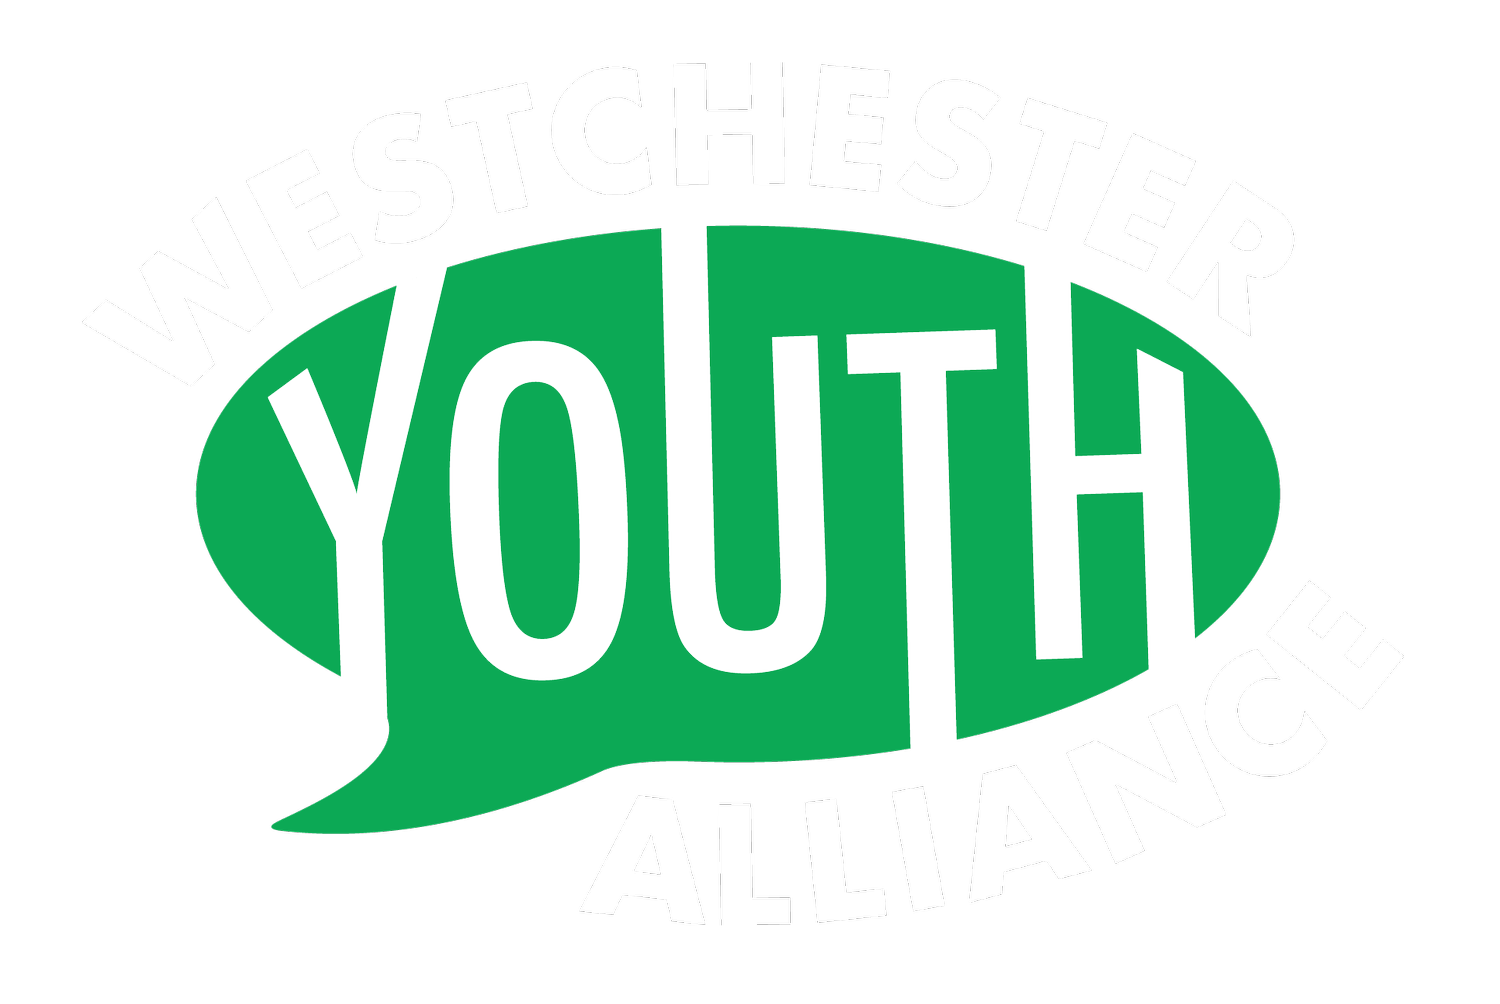 Westchester Youth Alliance